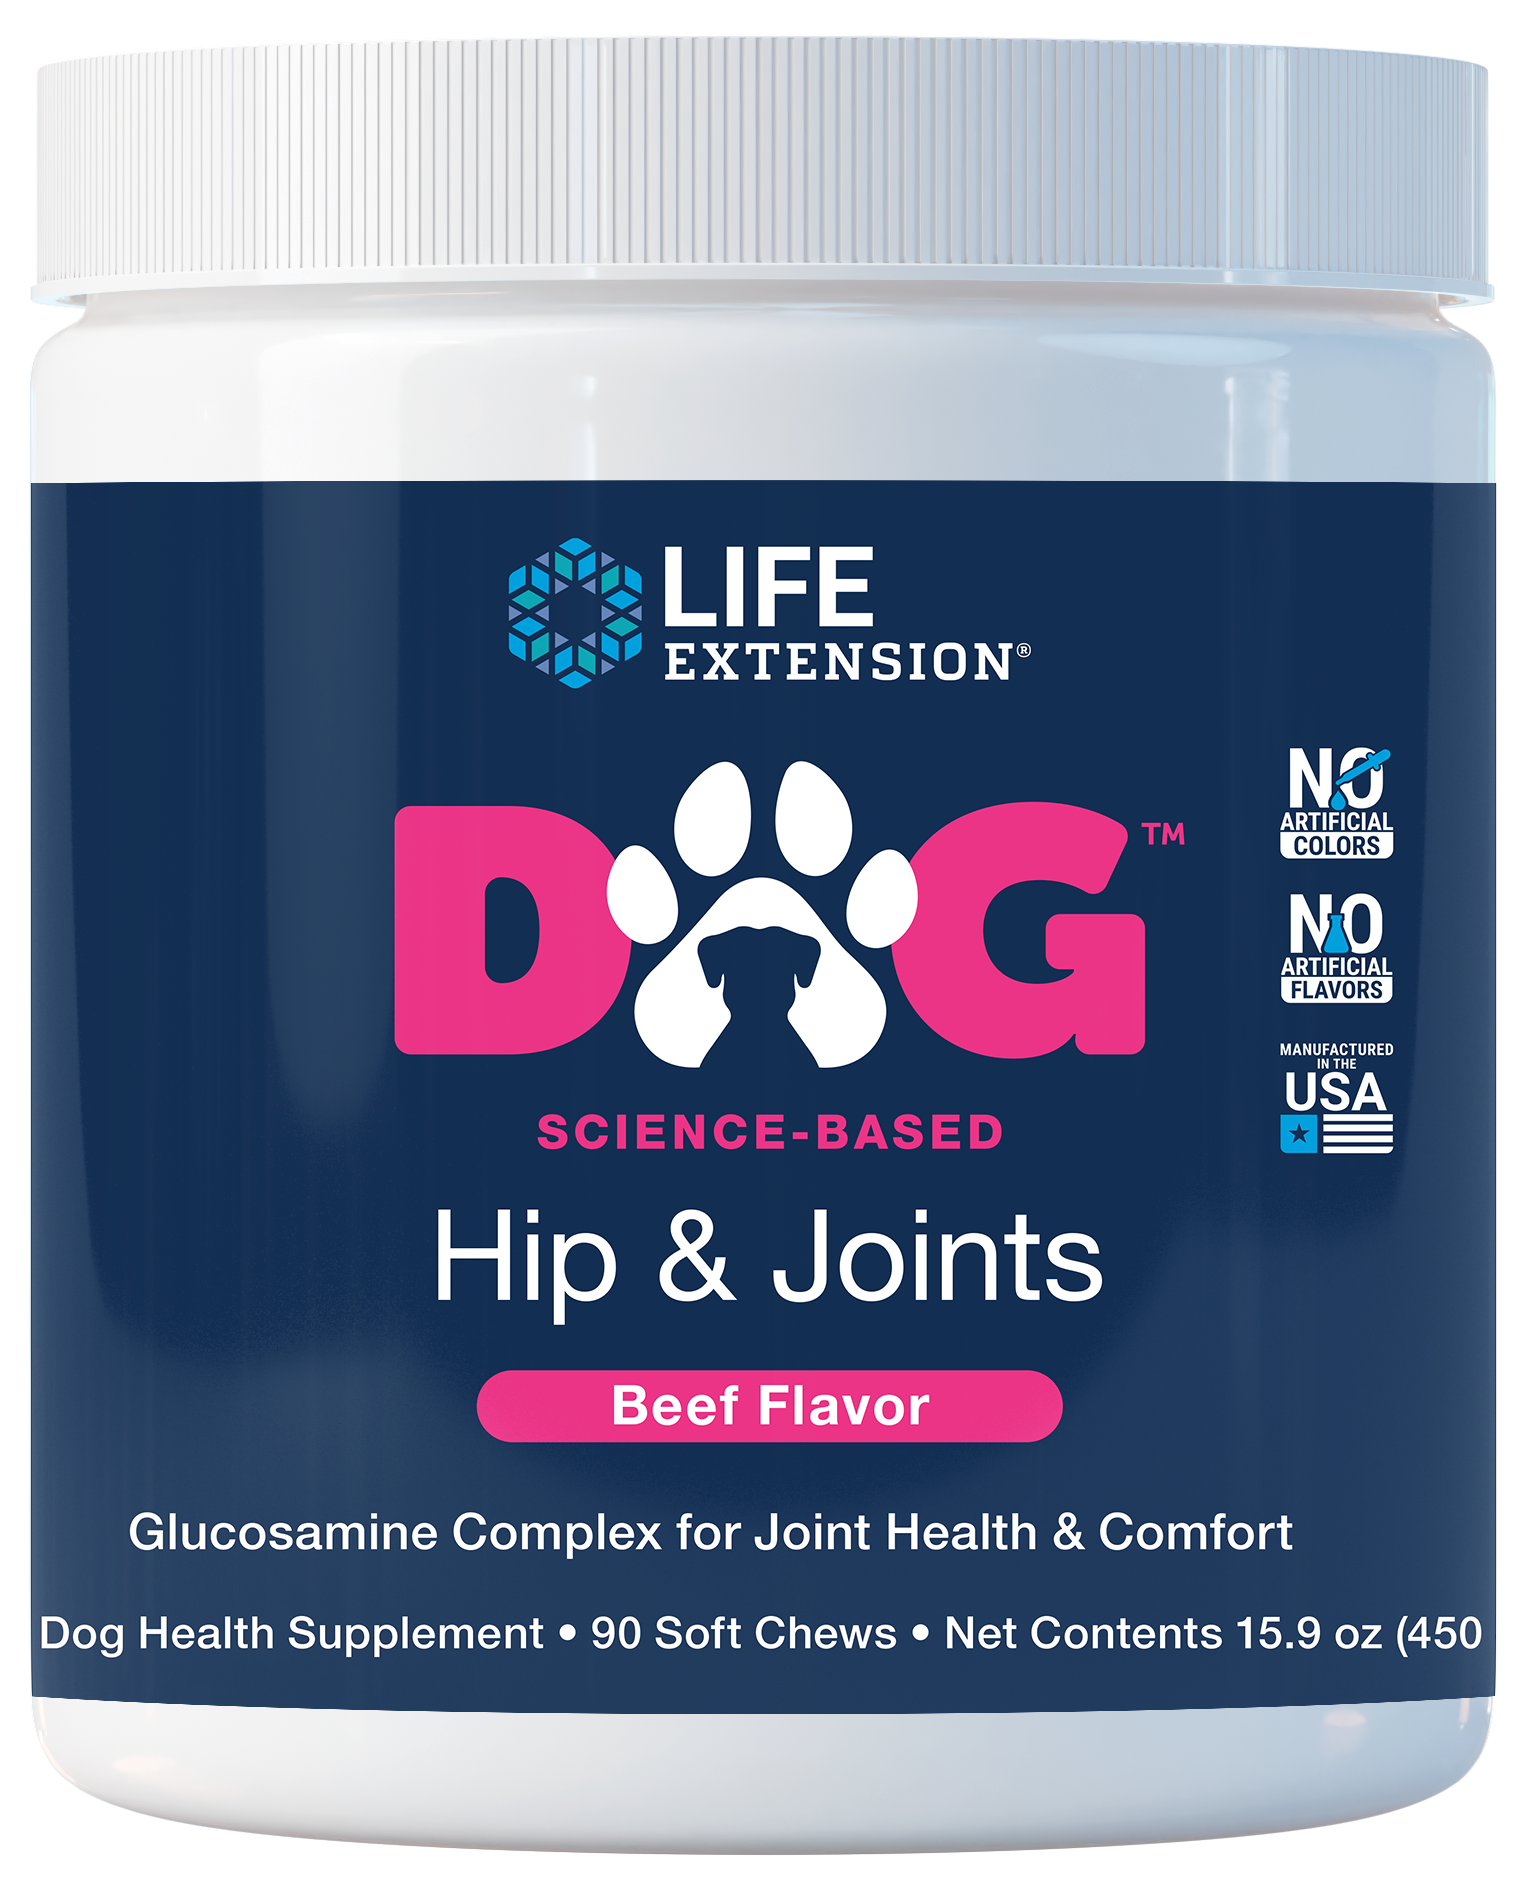 DOG Hip & Joints, 90 soft chews with beef flavor, glucosamine for joint health & comfort, MSM & PEA to fight discomfort